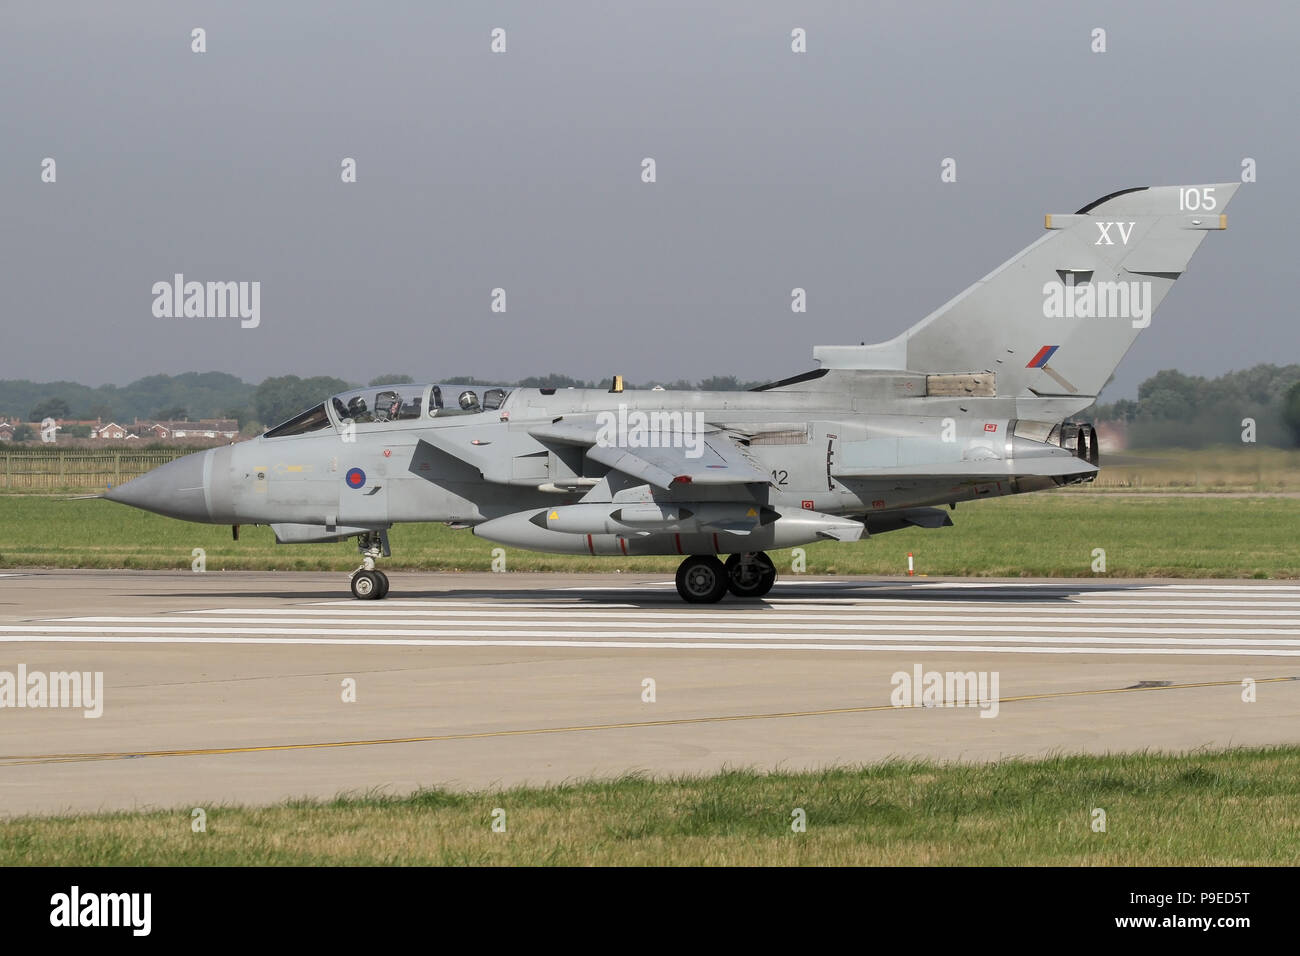 Carrying the markings of the defunct 15 Squadron, this RAF Tornado GR4 is about to depart the Coningsby runway during Exercise Green Flag. Stock Photo